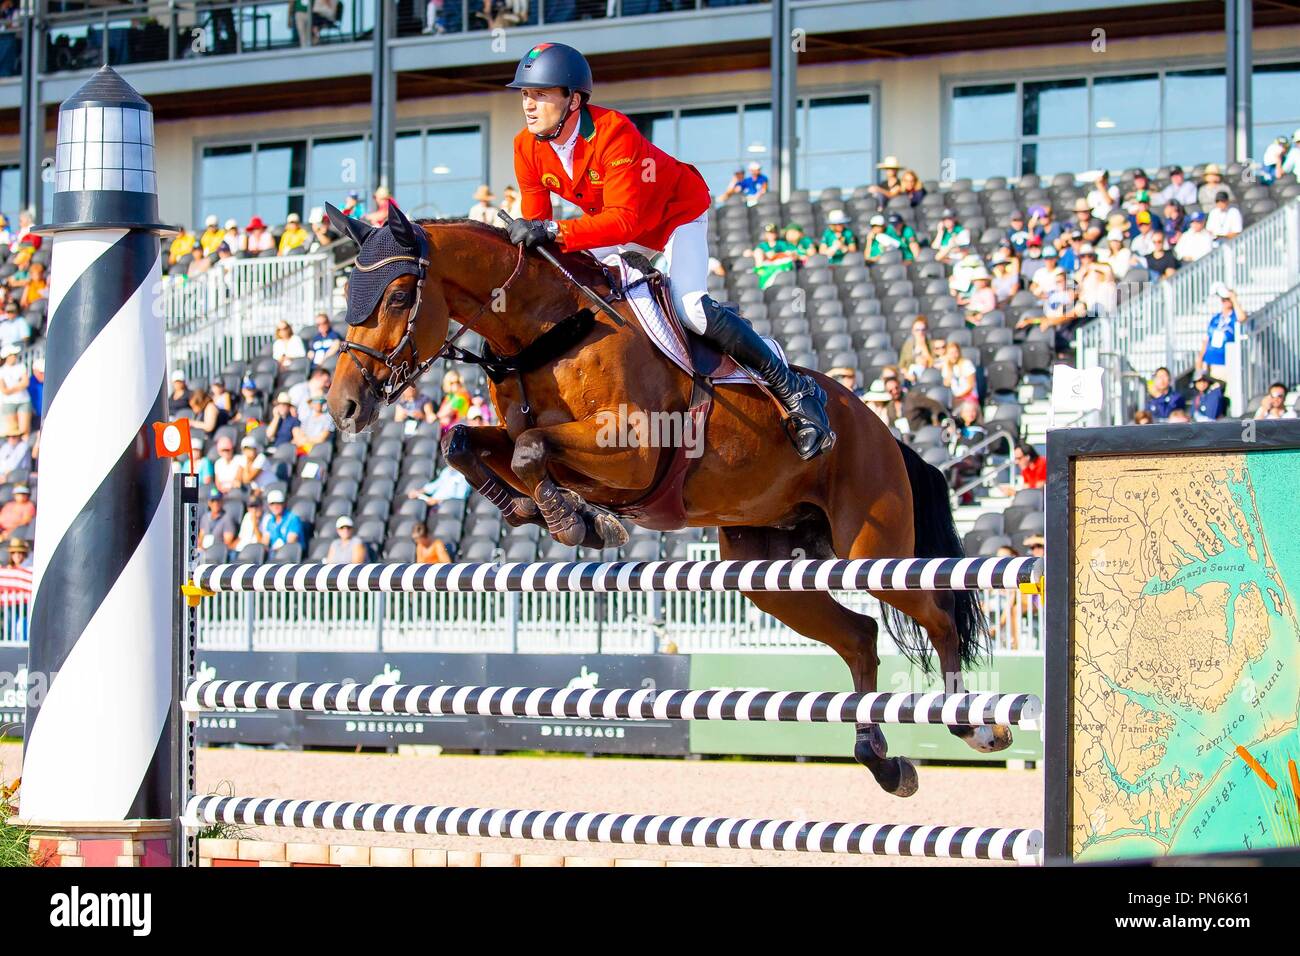 Tryon, California, USA. 19th Sept 2018. Rodrigo Giesteira Almeida riding GC Chopin's Bushi. POR. FEI World Team & Individual Jumping Championships. First Competition. Shiowjumping. 1.55m. Table C. Day 8. World Equestrian Games. WEG 2018 Tryon. North Carolina. USA. 19/09/2018. Credit: Sport In Pictures/Alamy Live News Stock Photo